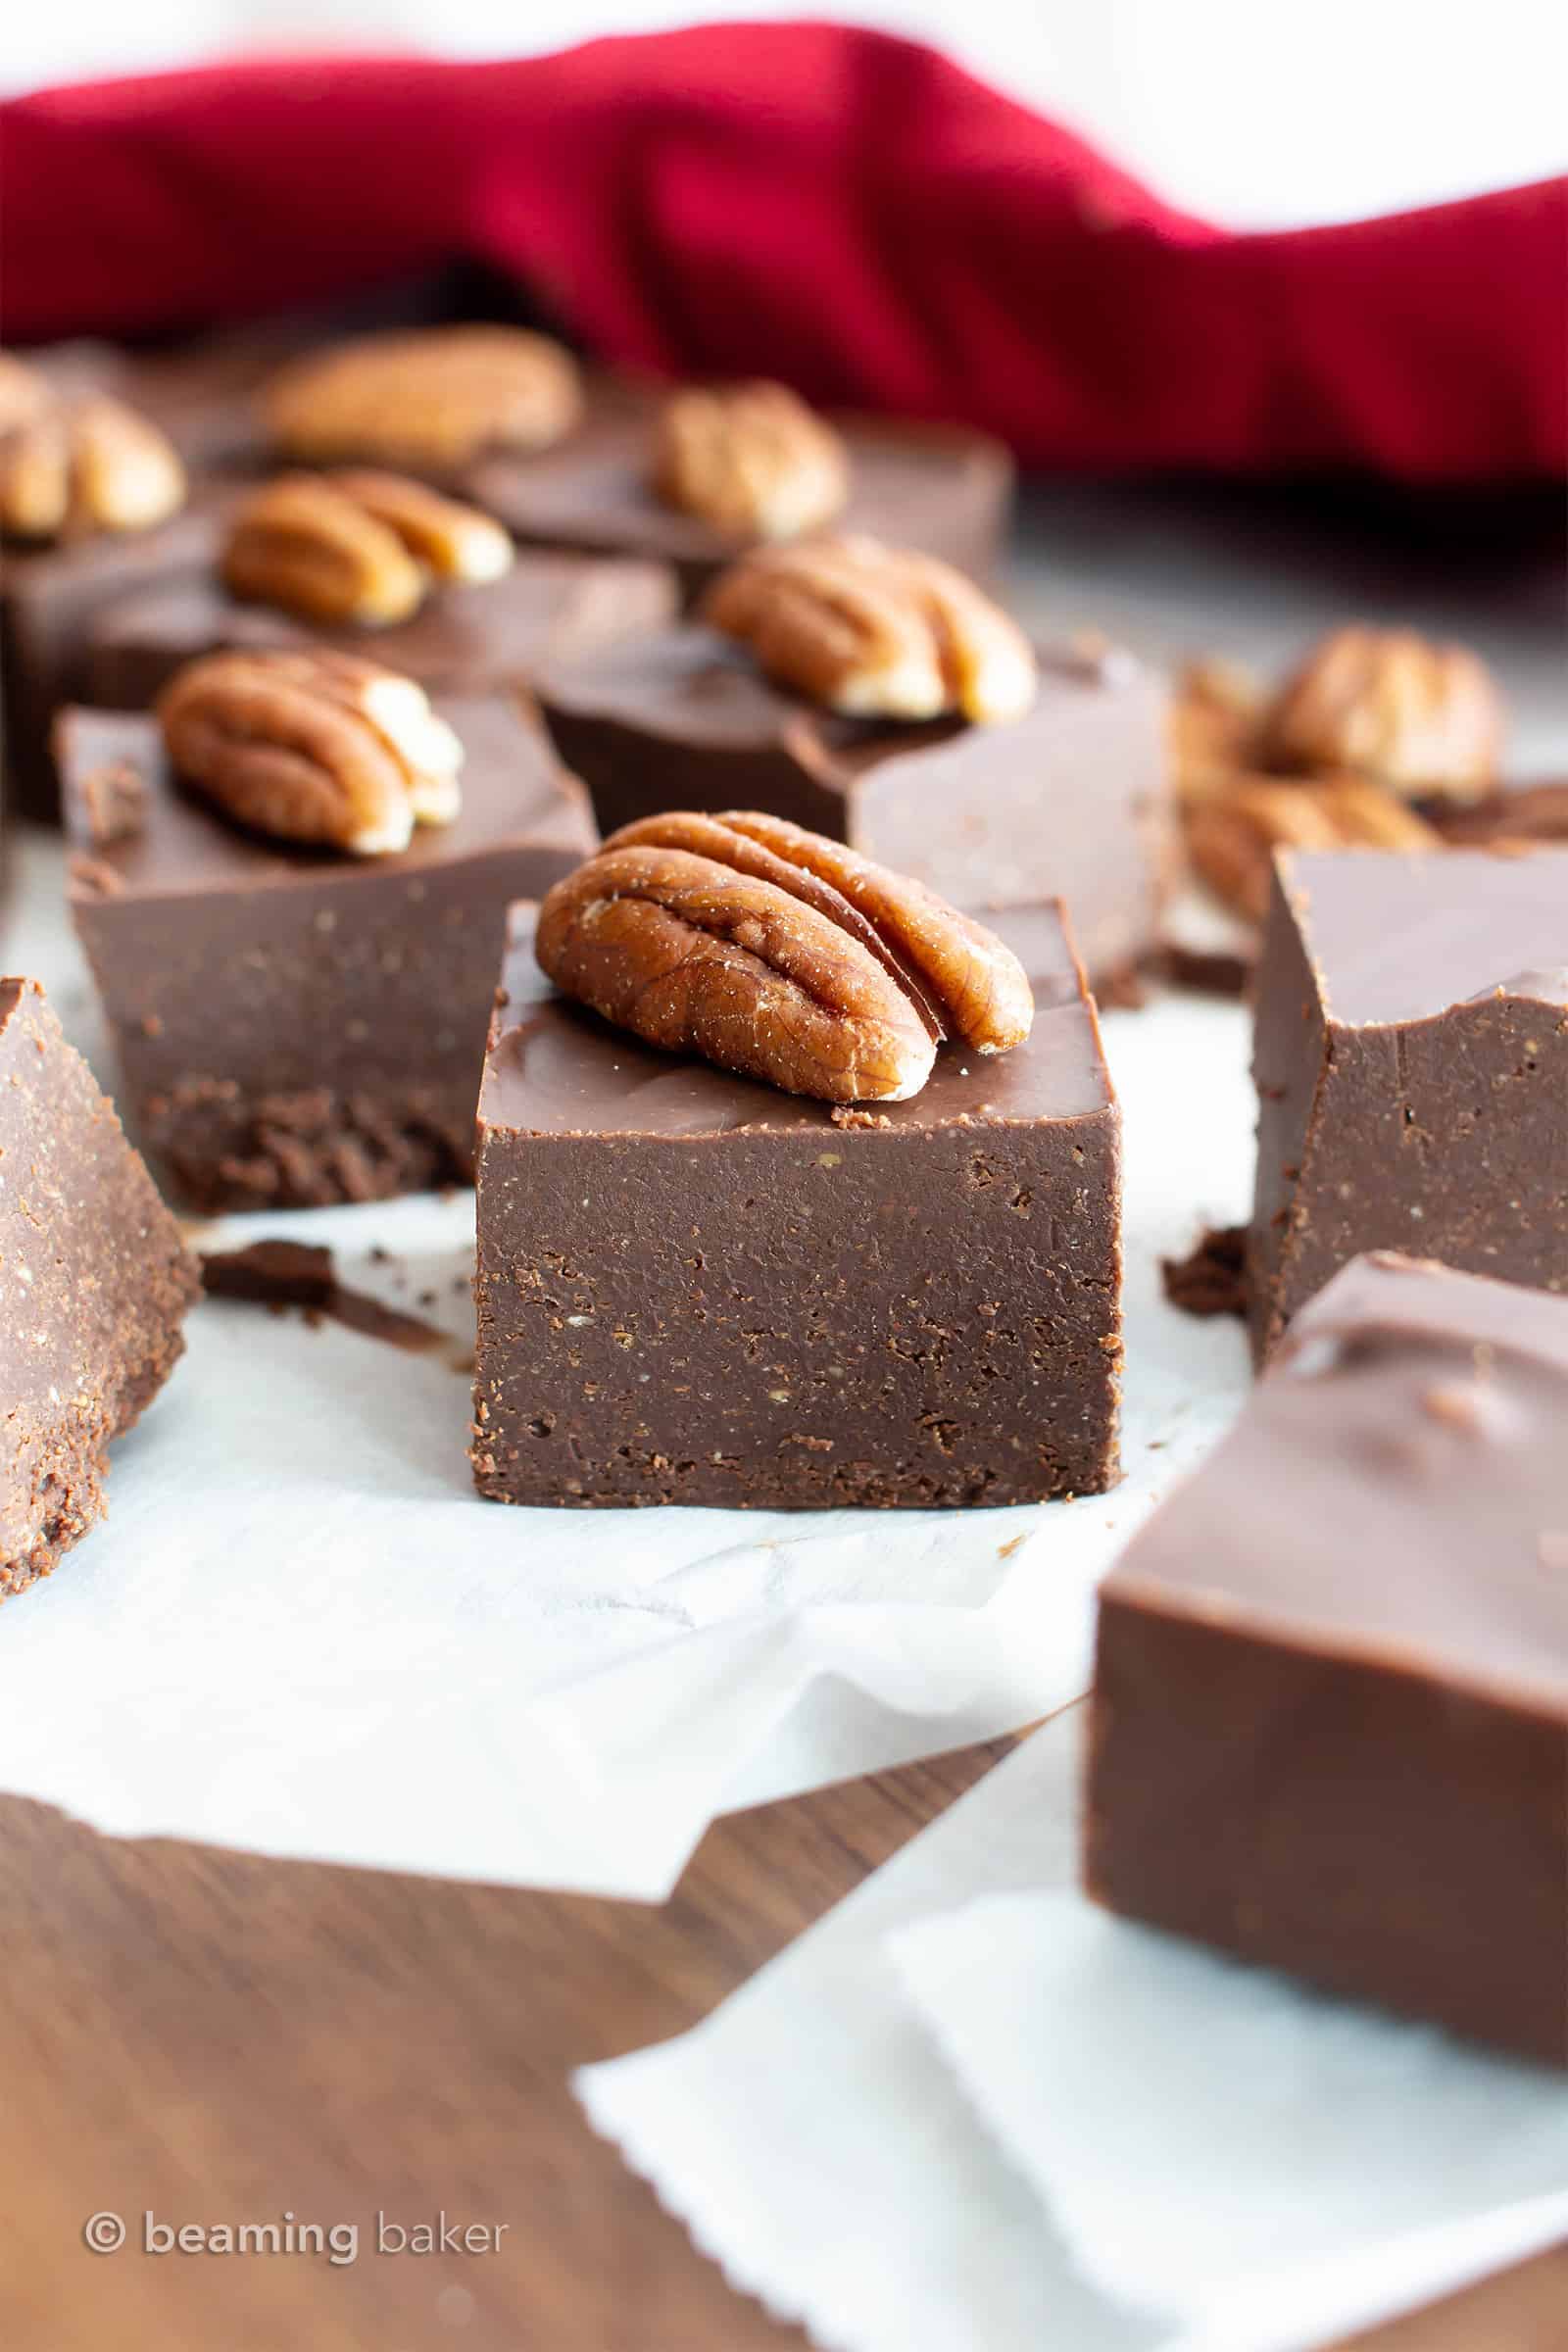 Keto Chocolate Fudge: this low carb chocolate pecan fudge recipe only needs 2 ingredients, is vegan & dairy free! The best 5 minute fudge—for thick squares of sugar free chocolate fudge! Tastes like chocolate covered pecans. #Keto #Fudge #Vegan #LowCarb #SugarFree | Recipe at BeamingBaker.com